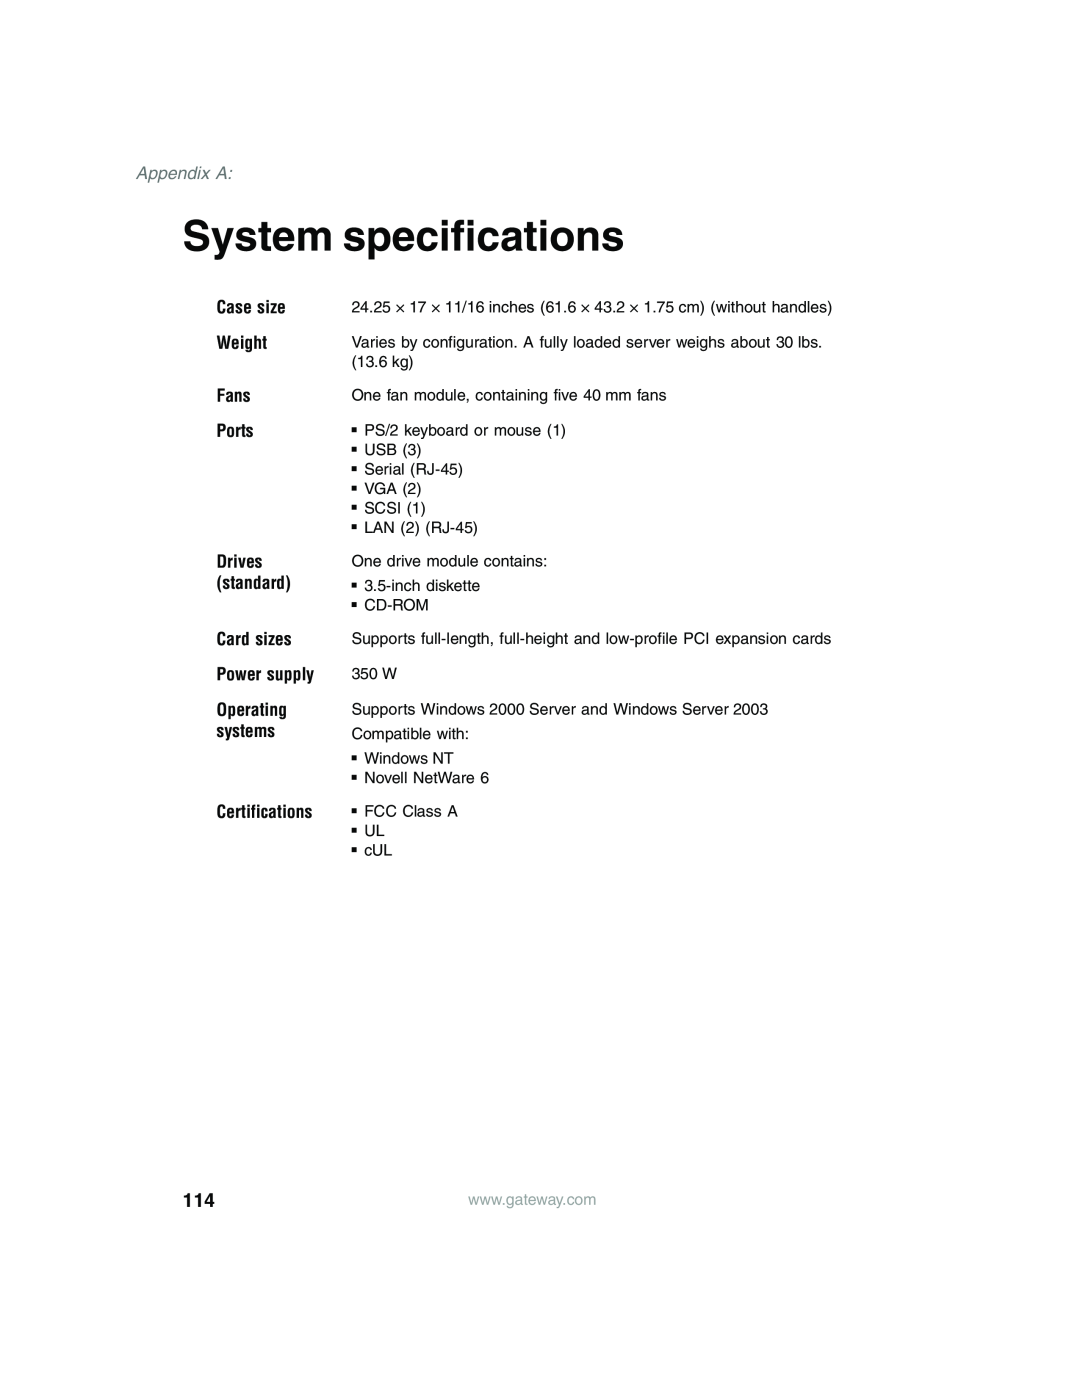 Gateway 955 manual System specifications, Appendix A, Case size Weight Fans Ports, Card sizes Power supply, Certifications 